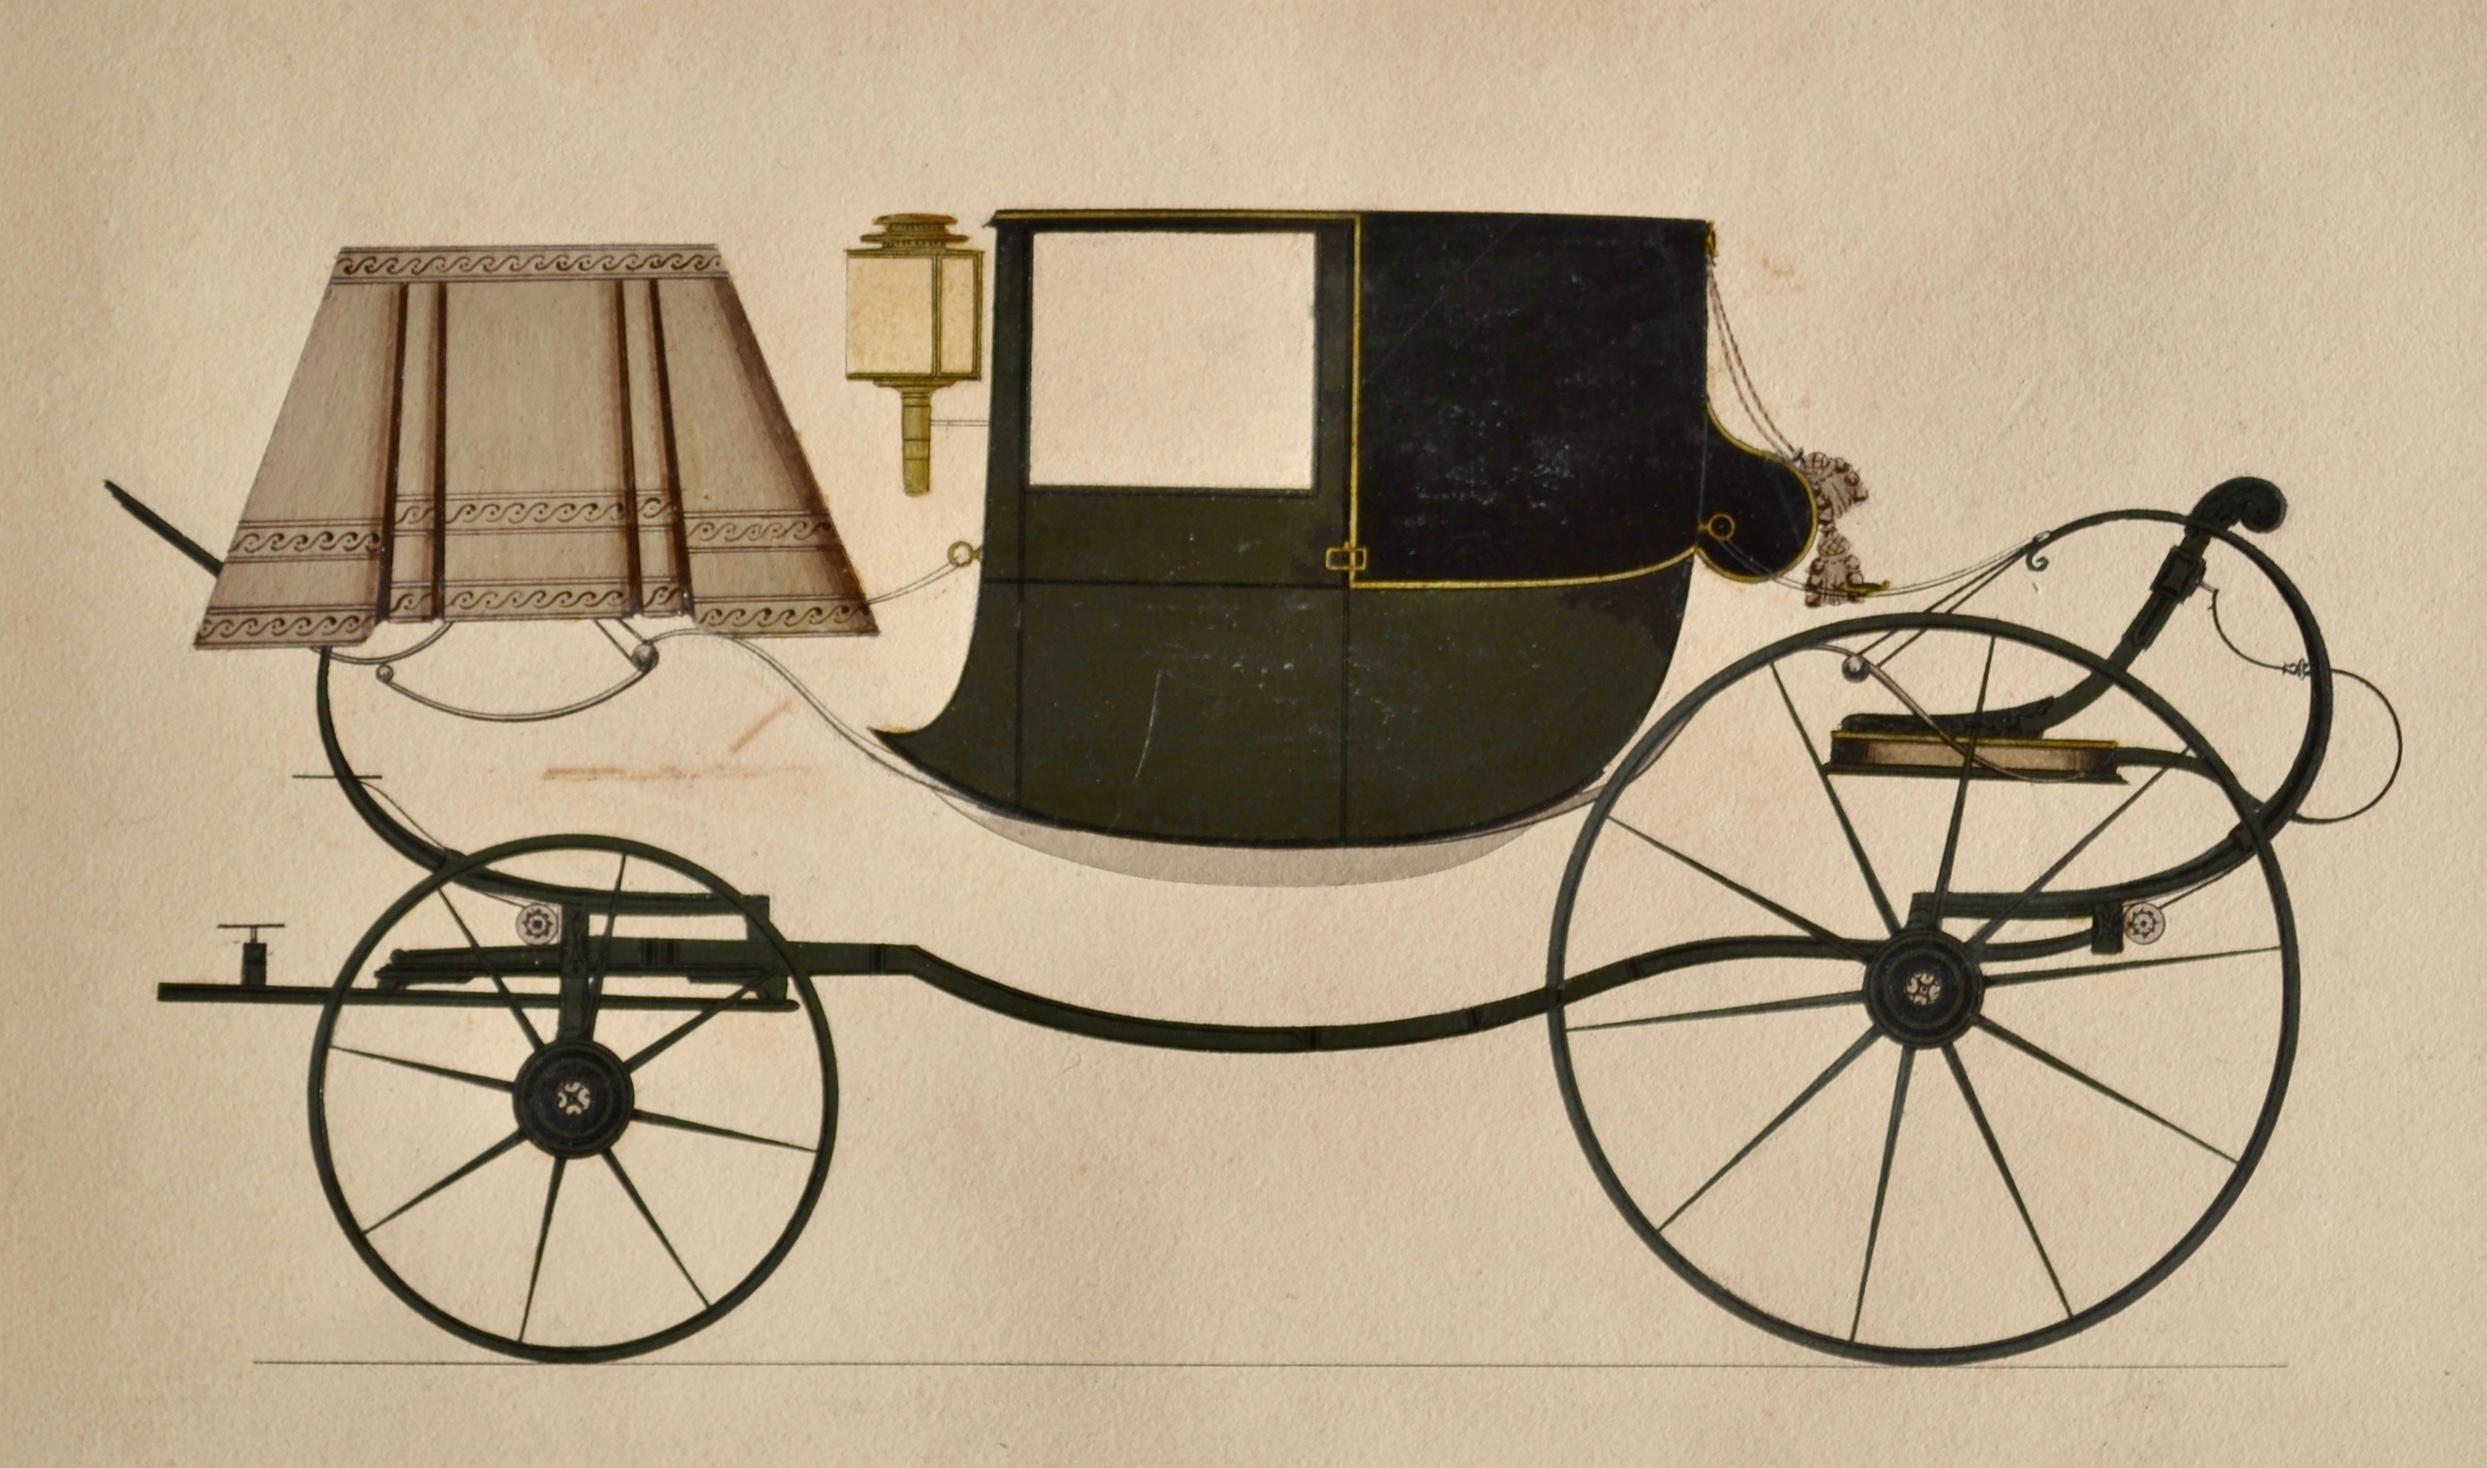 SAMUEL HOBSON
(fl. 1815-1837)

Carriage Design

Bodycolour, gum arabic, gold paint and pen and ink
Unframed in conservation mount only

 18 by 31 cm., 7 by 12 ¼ in.
(mount size 34 by 46 cm., 13 ¼ by 18 in.)

Samuel Hobson was one of London’s premier